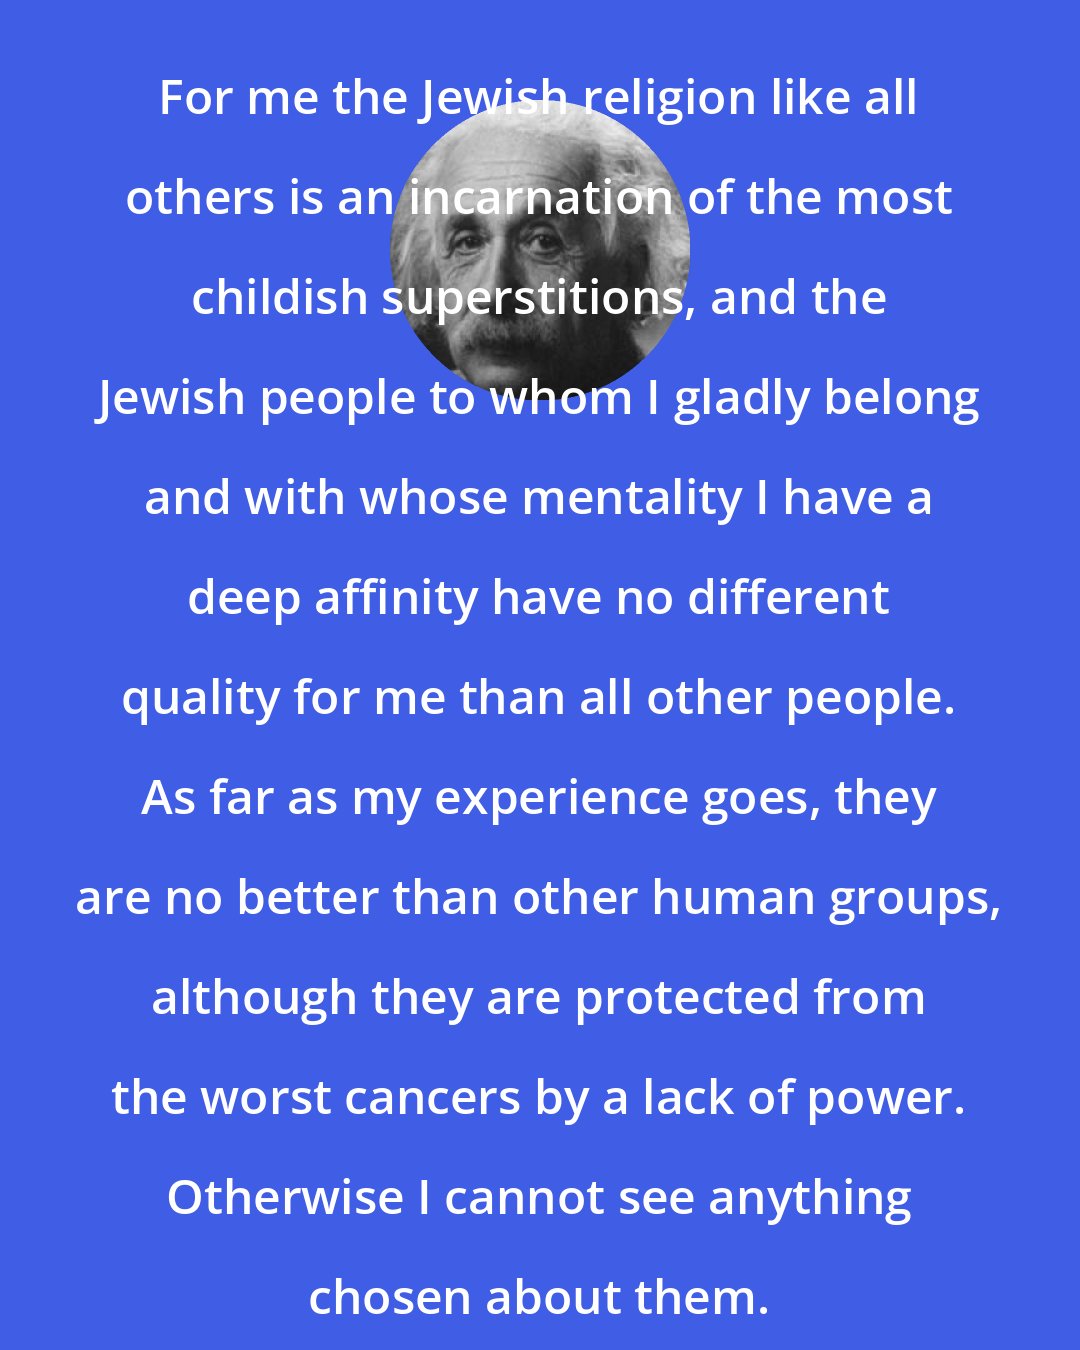 Albert Einstein: For me the Jewish religion like all others is an incarnation of the most childish superstitions, and the Jewish people to whom I gladly belong and with whose mentality I have a deep affinity have no different quality for me than all other people. As far as my experience goes, they are no better than other human groups, although they are protected from the worst cancers by a lack of power. Otherwise I cannot see anything chosen about them.